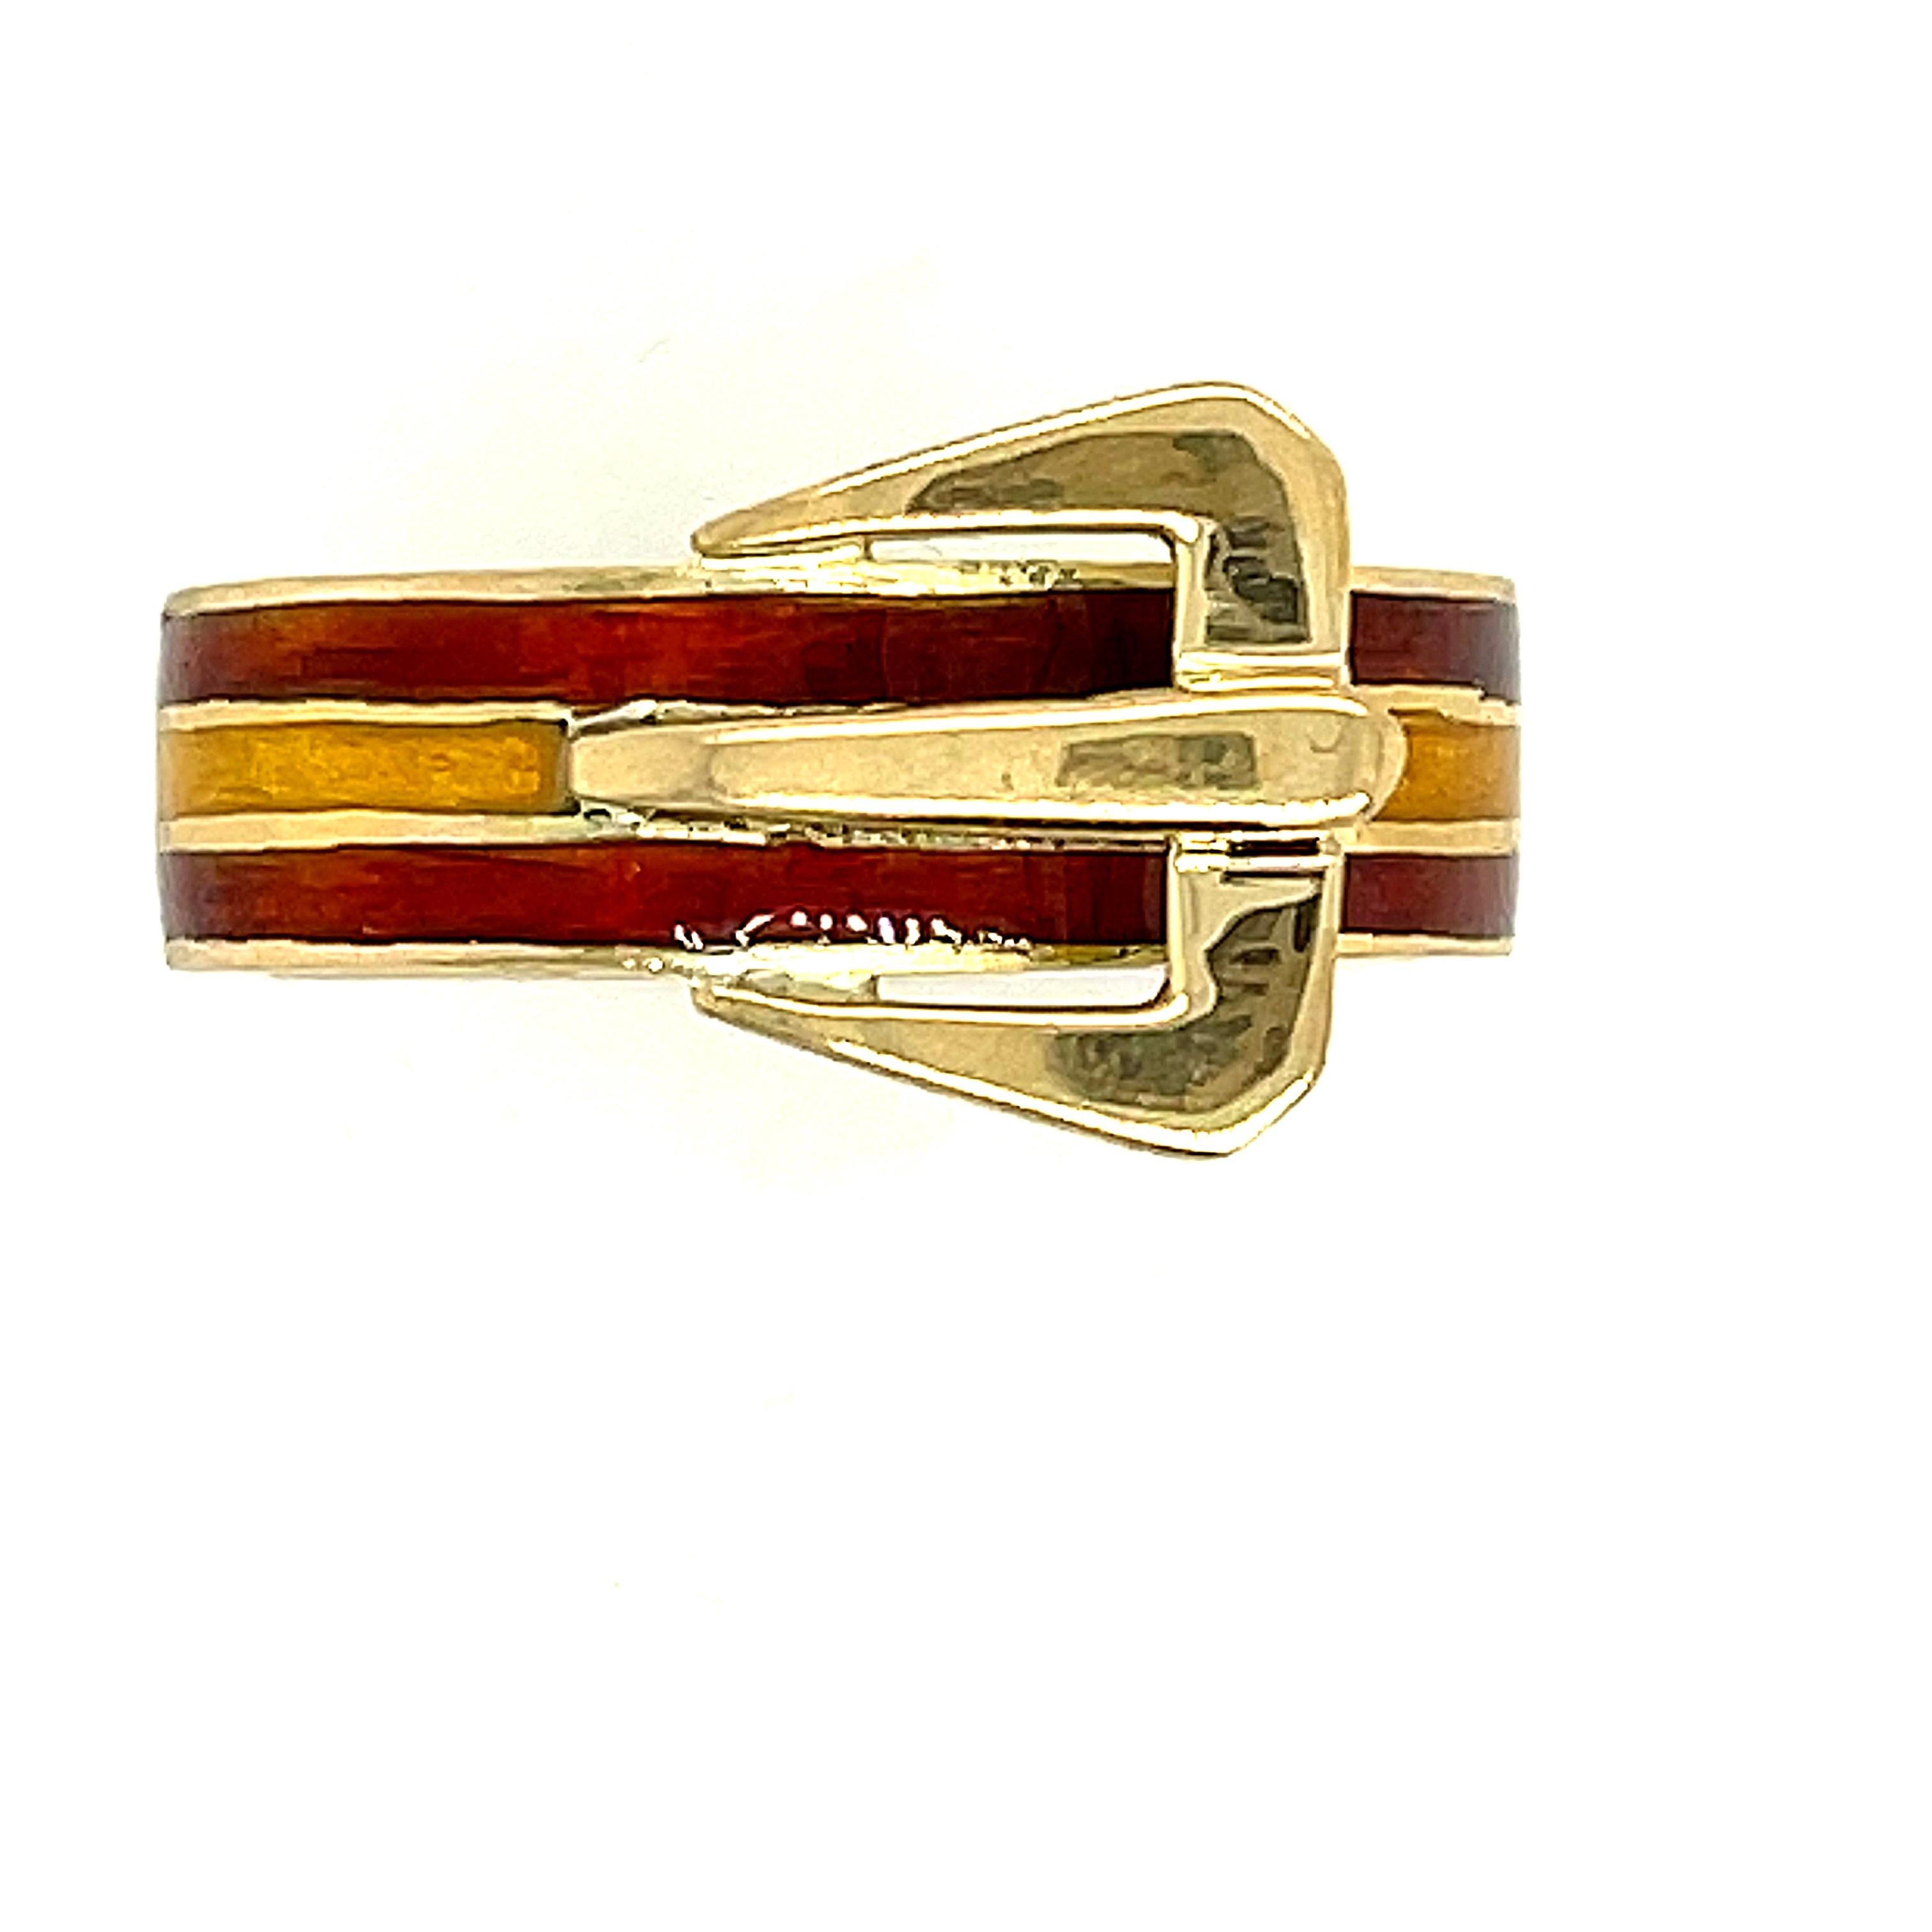 A vintage enamel buckle ring with yellow and orange enamel by Gucci, circa 1970. This cute buckle ring is classic Gucci design with the bold buckle and bright colors. It matches similar bracelets and belts they made from the time. This ring is super